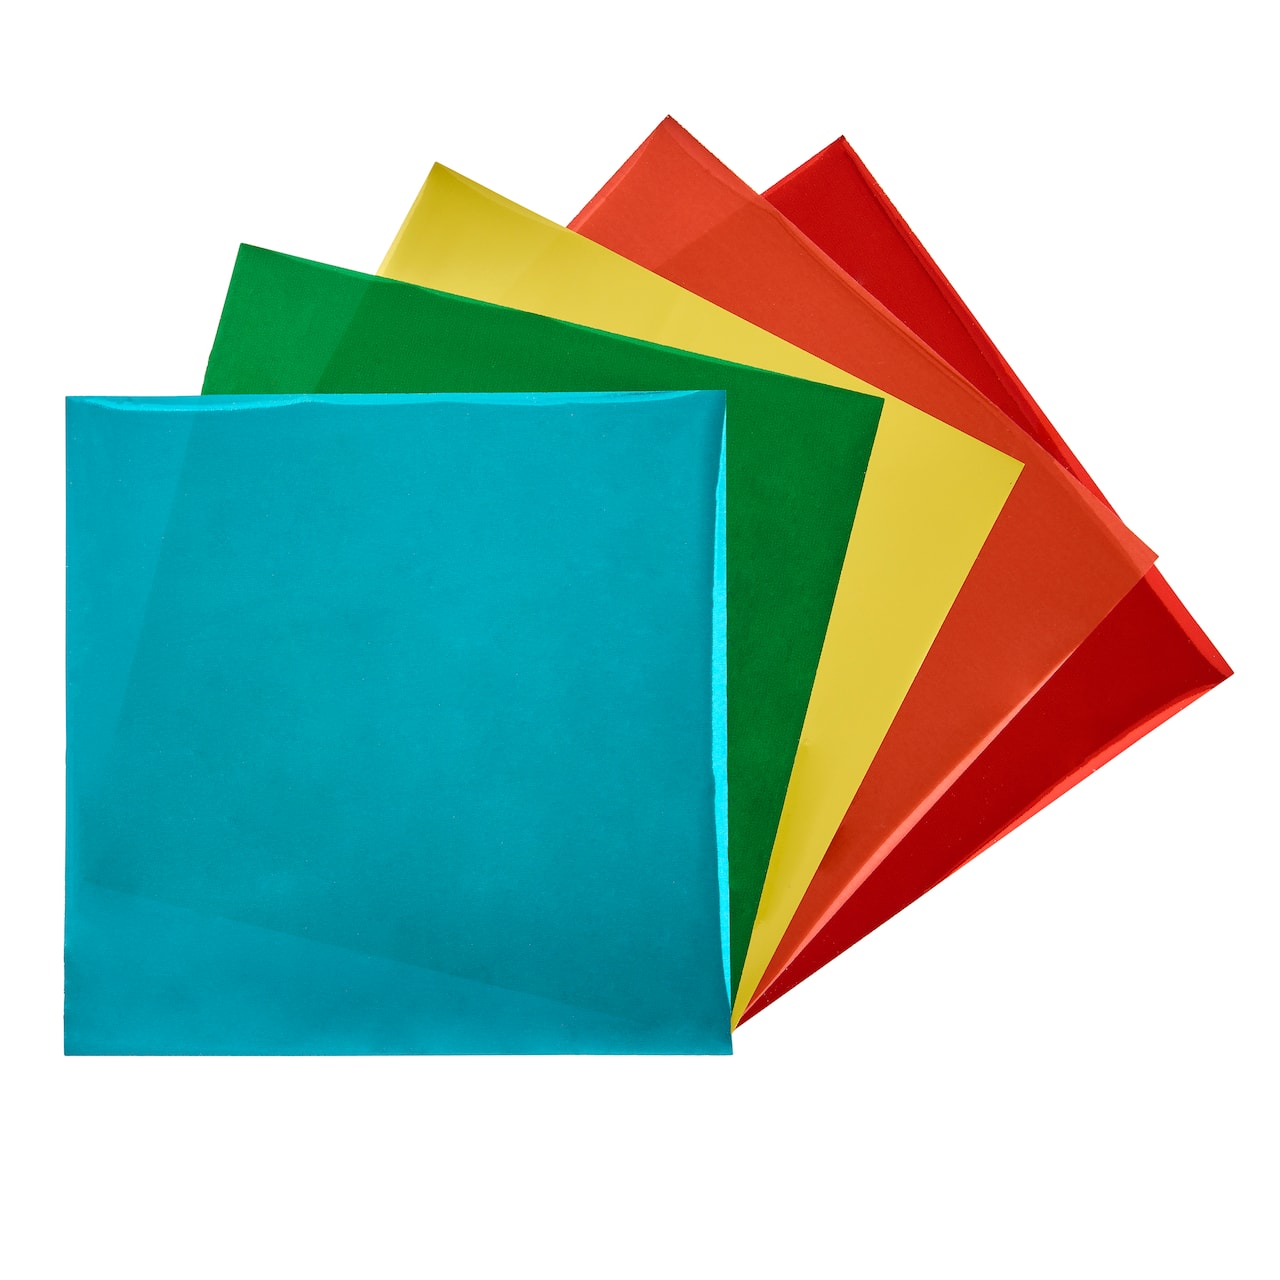 Multicolor Foil Transfer Sheets by Recollections&#x2122;, 5.5&#x22; x 5.5&#x22;